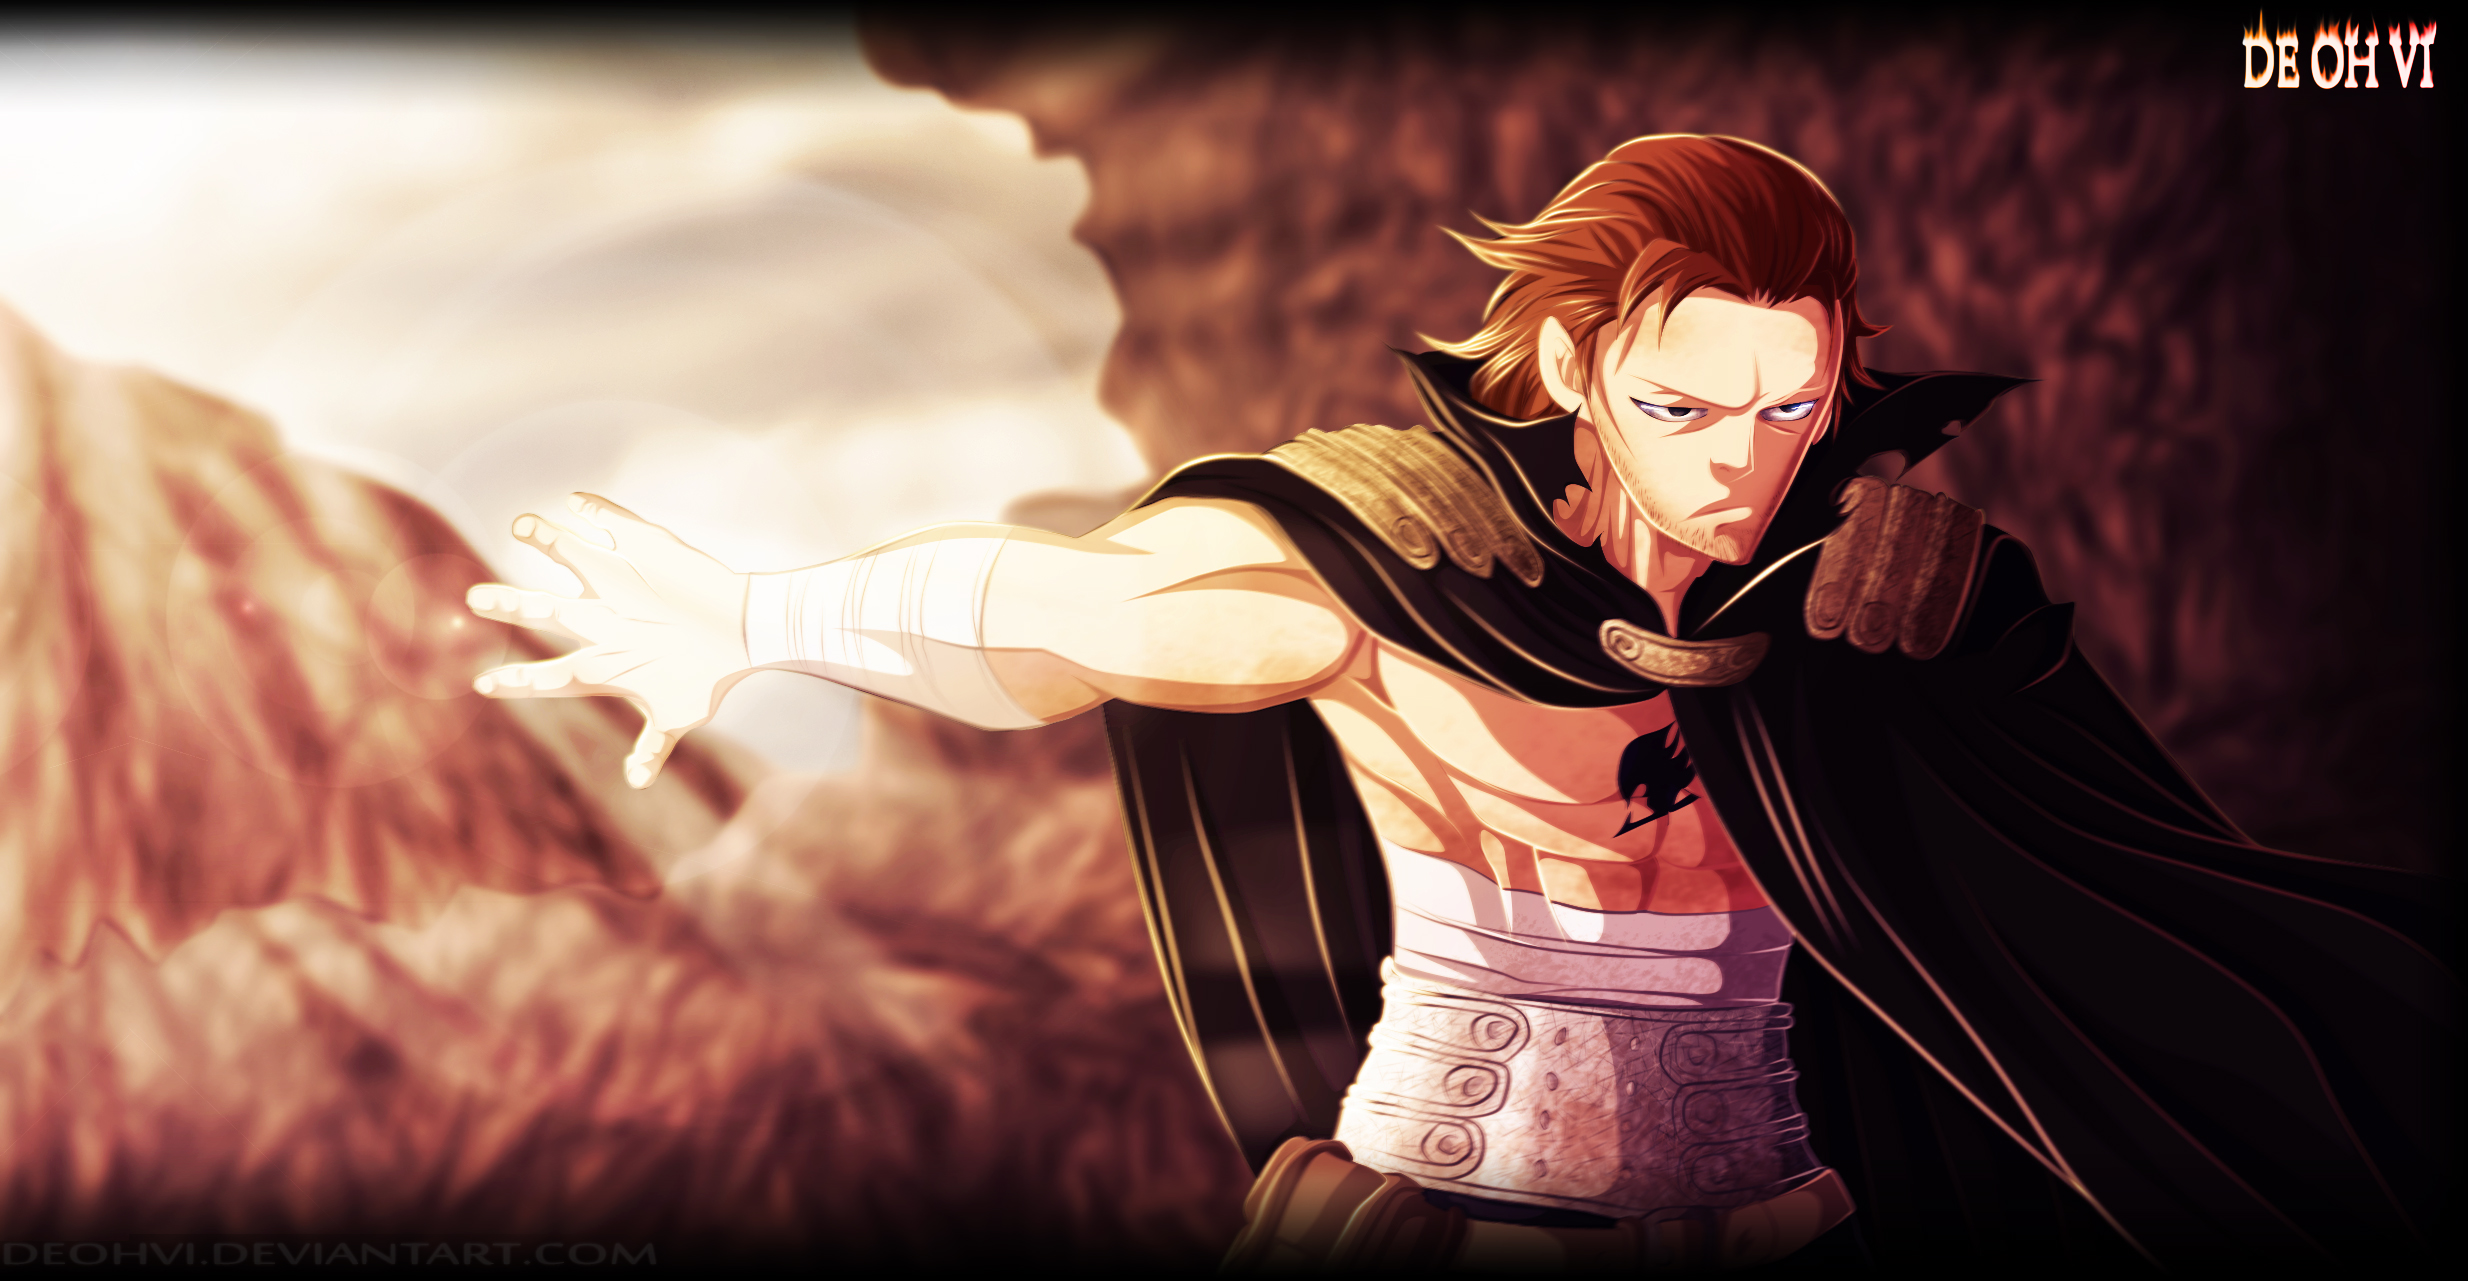 Gildarts Clive Coloring By Deohvi